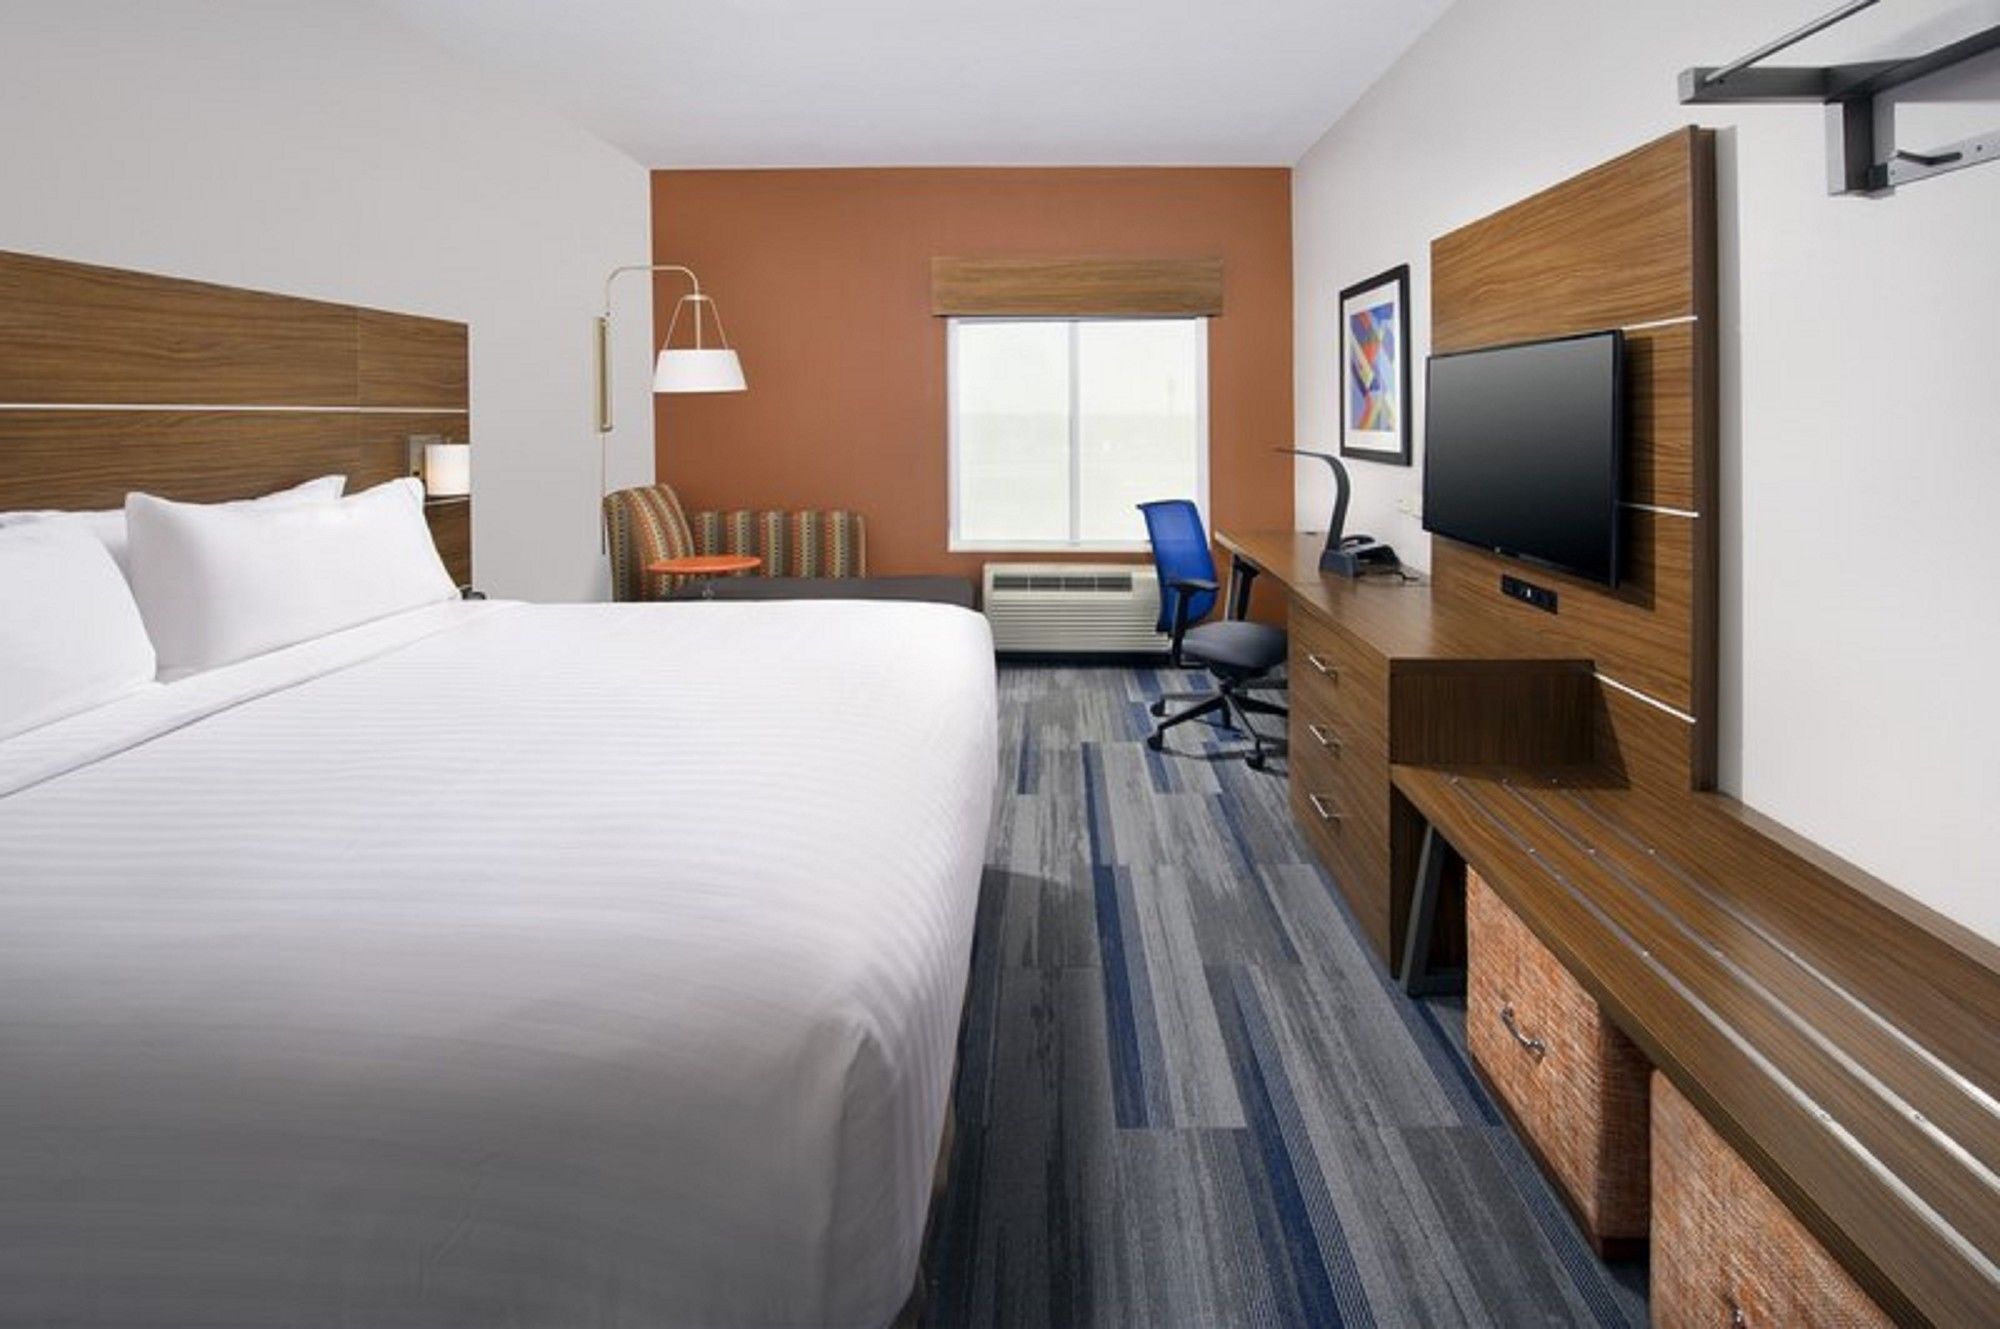 Holiday Inn Express & Suites Greenwood Mall, an Ihg Hotel